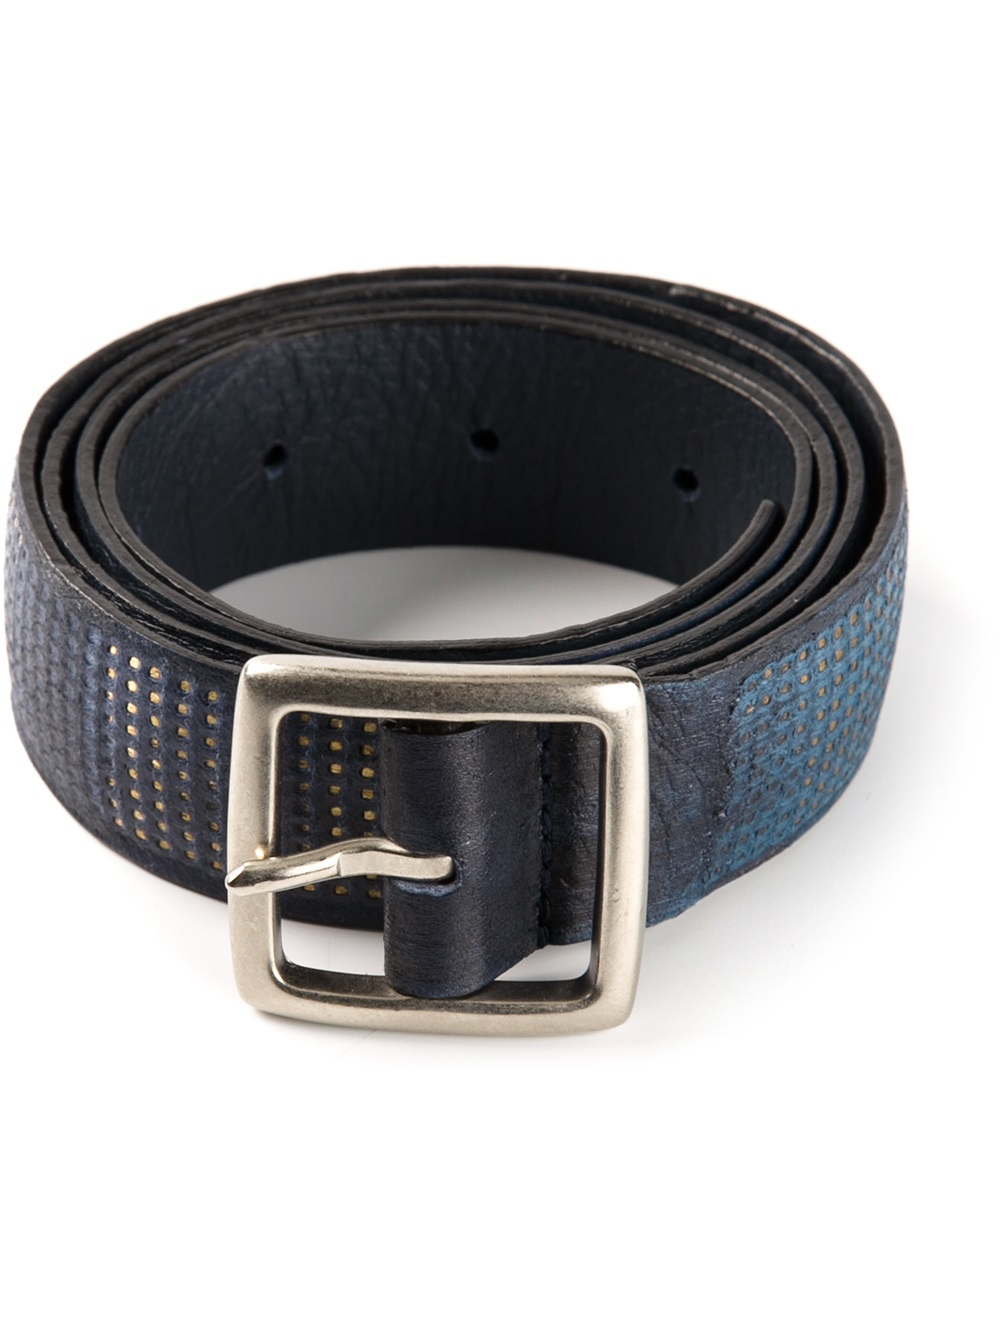 Lyst - Htc Hollywood Trading Company Buckle Belt in Blue for Men